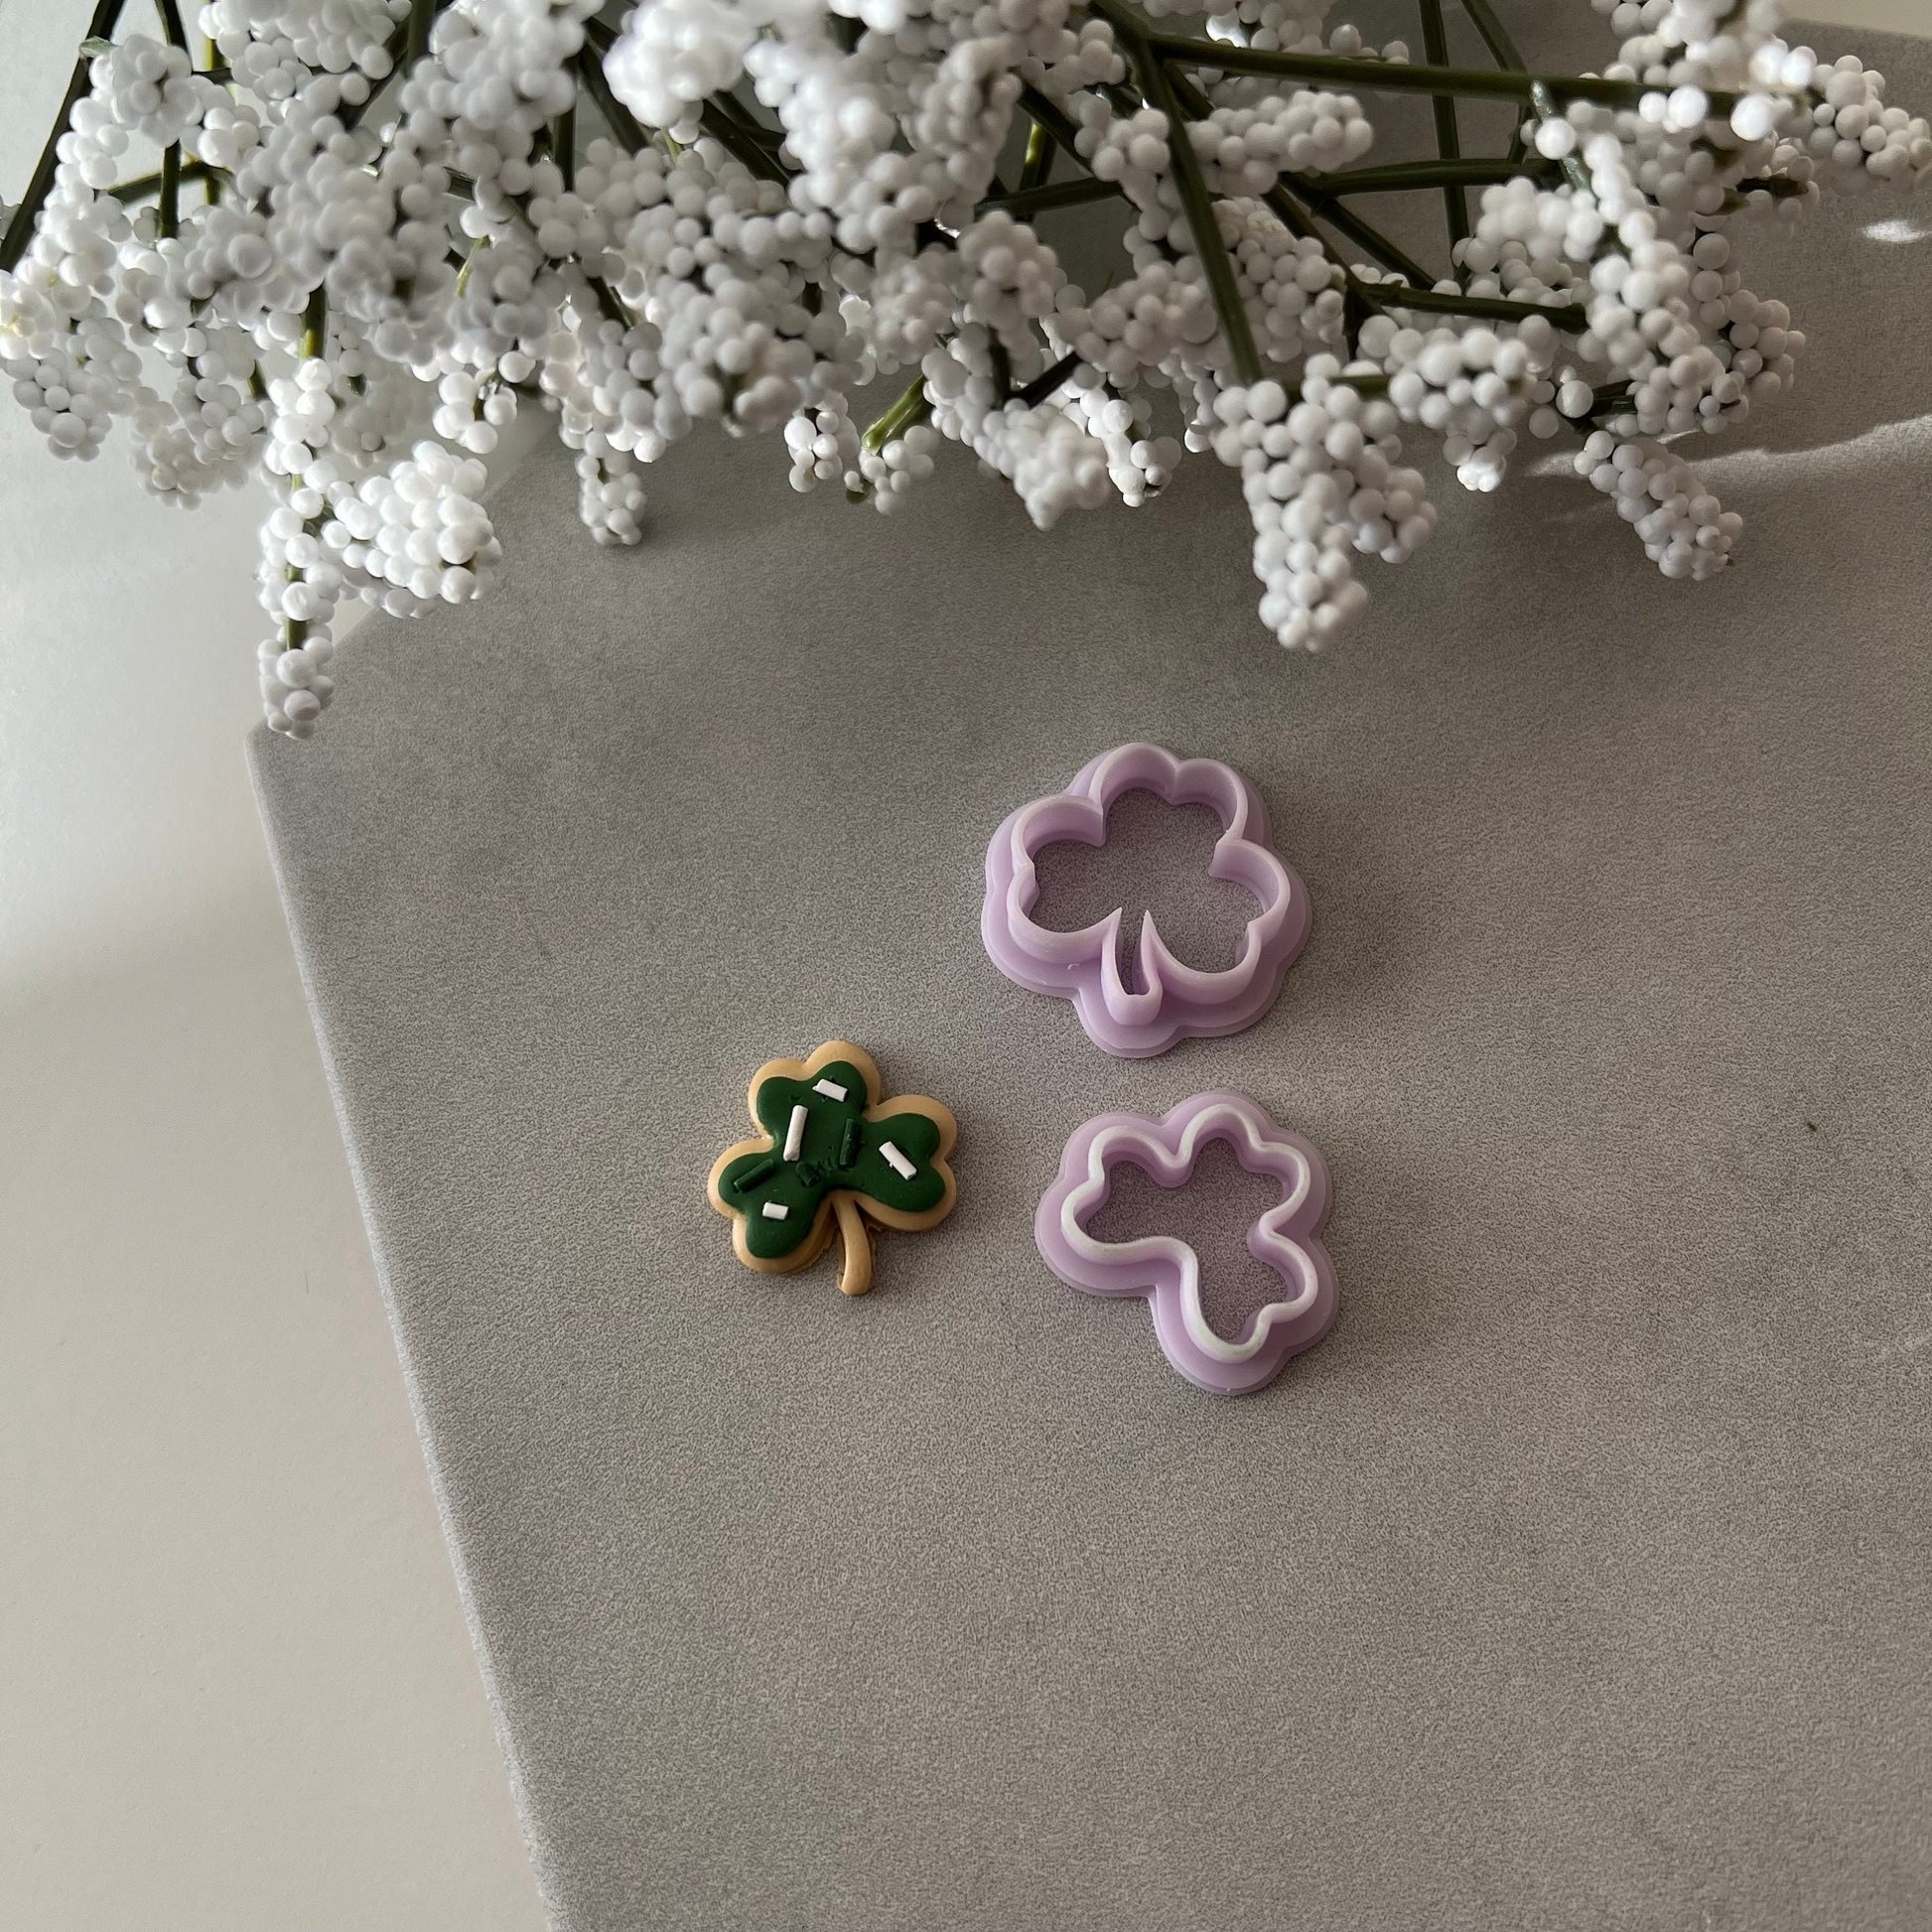 Shamrock Sugar Cookie Cutter | 0.75"-1.25" | Polymer Clay Cutter Earrings St Patrick’s Day